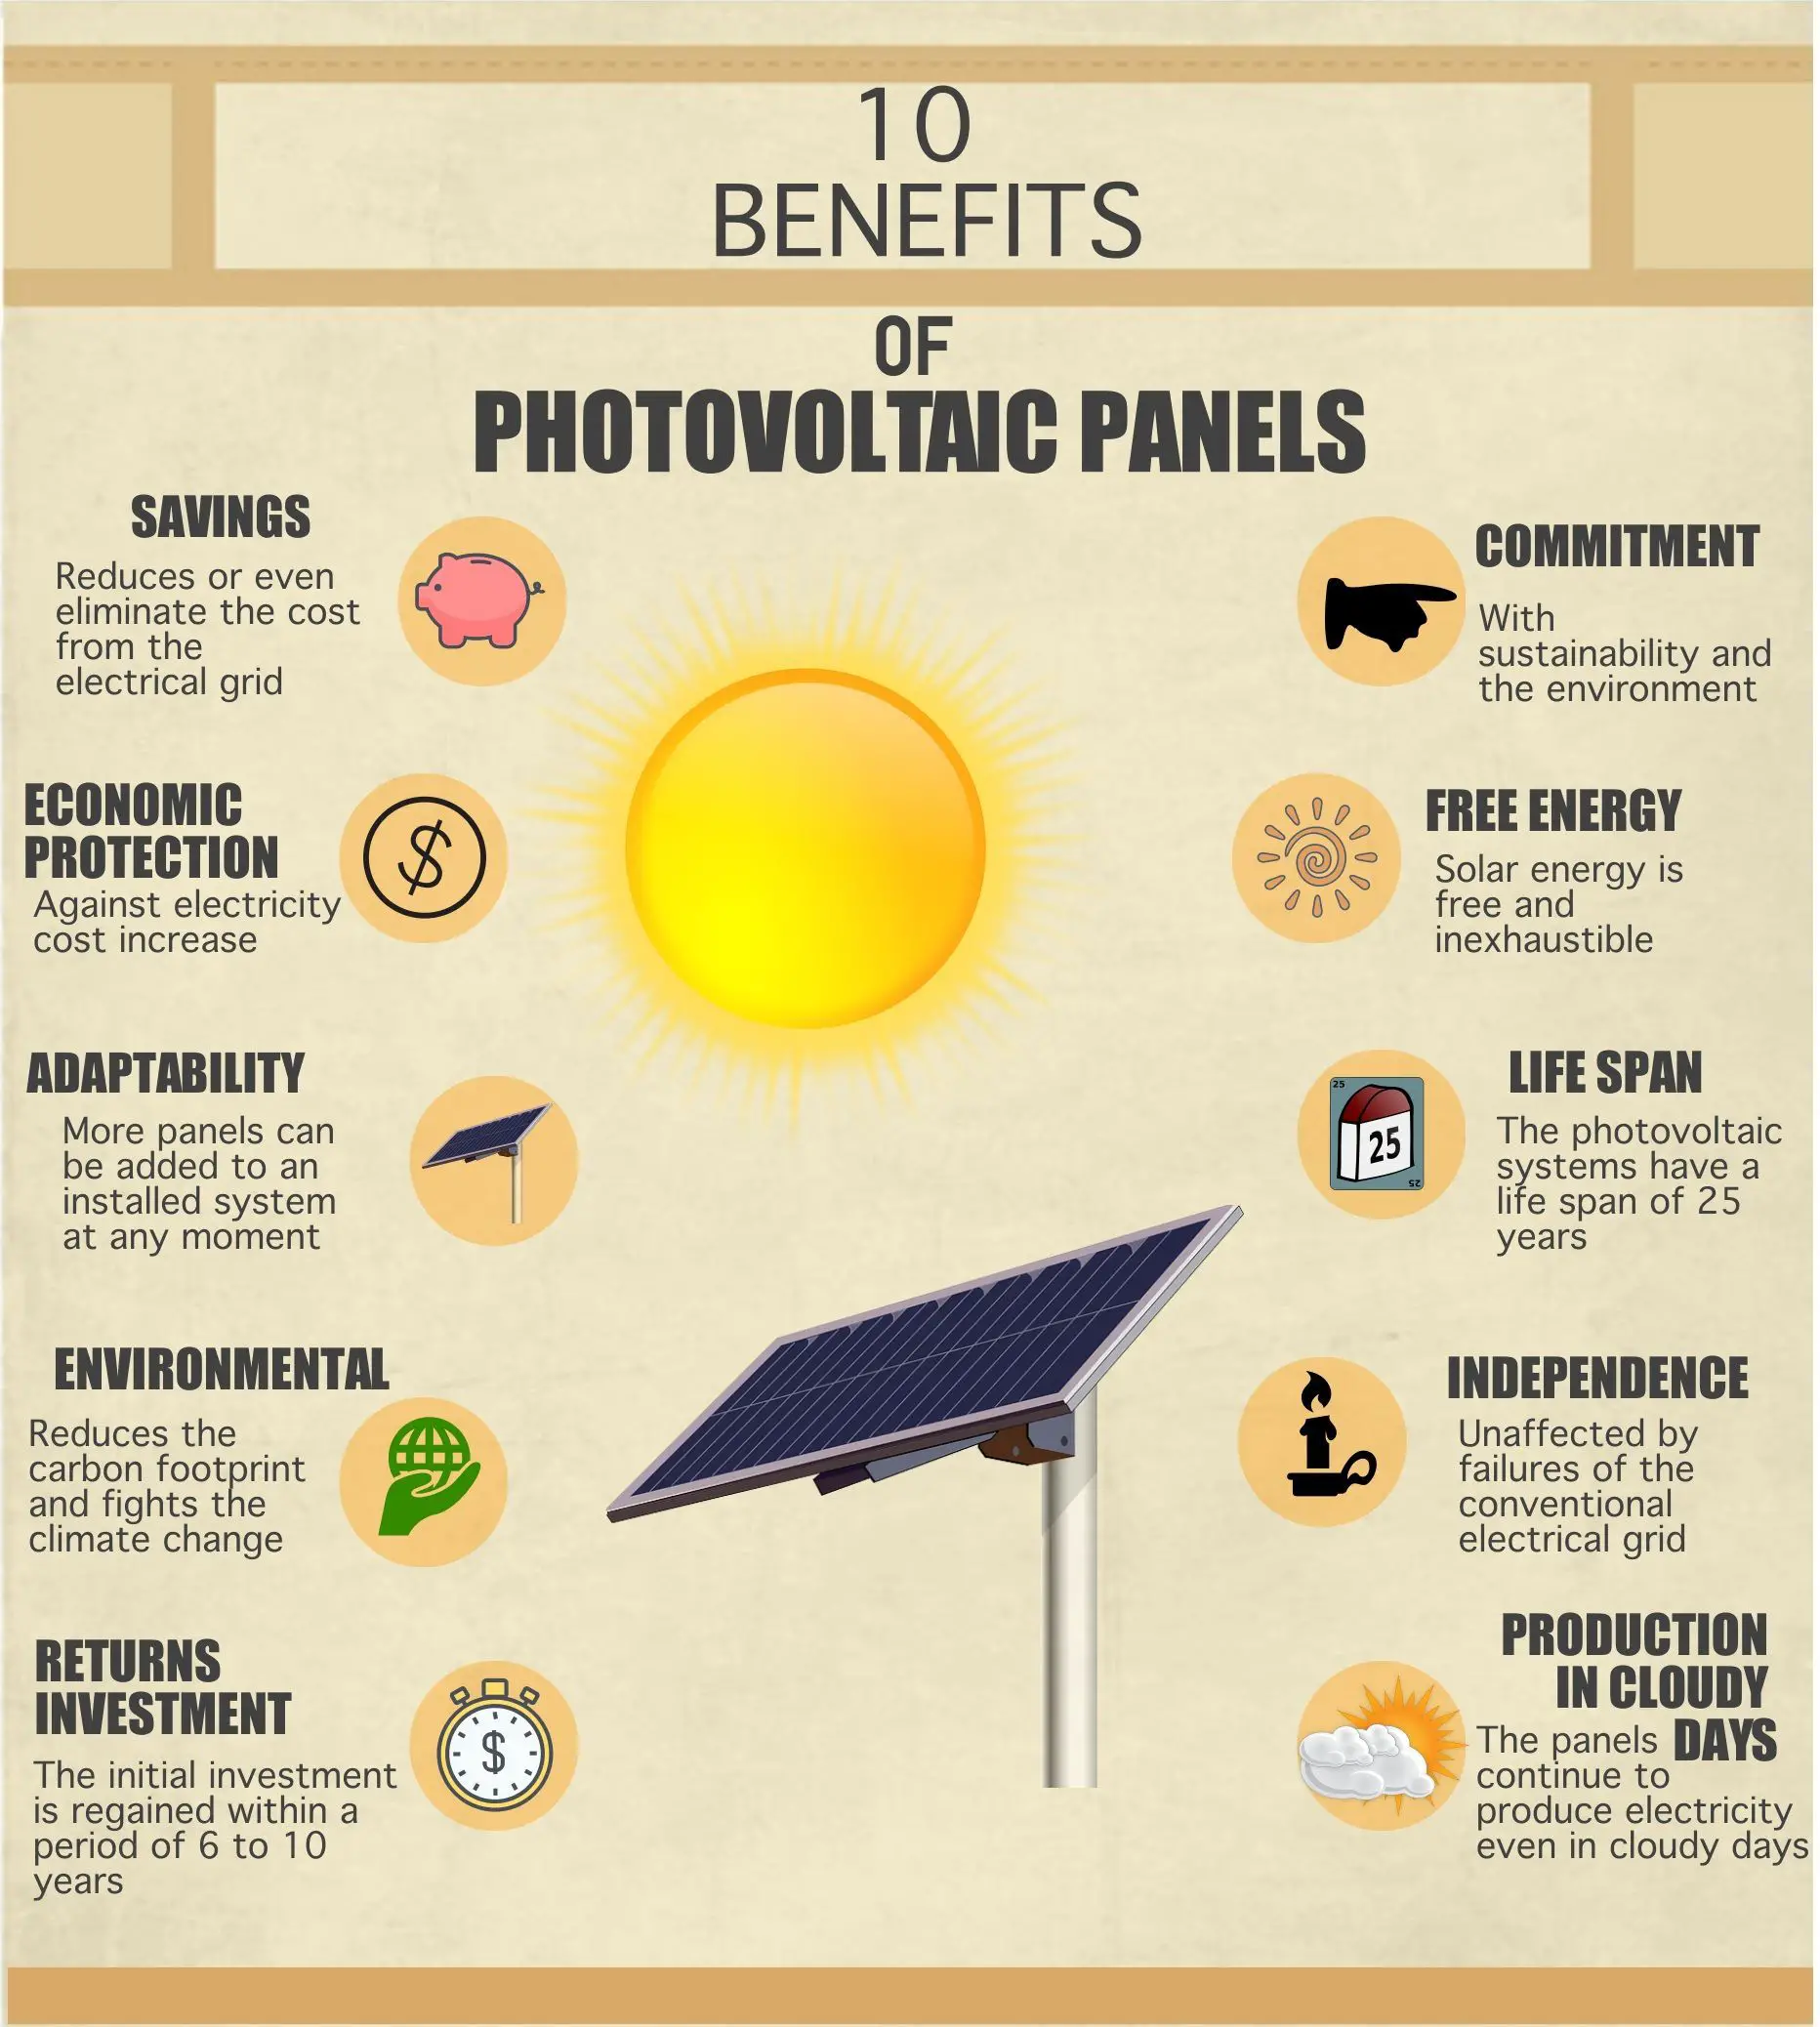 Benefits of Photovoltaic Panels